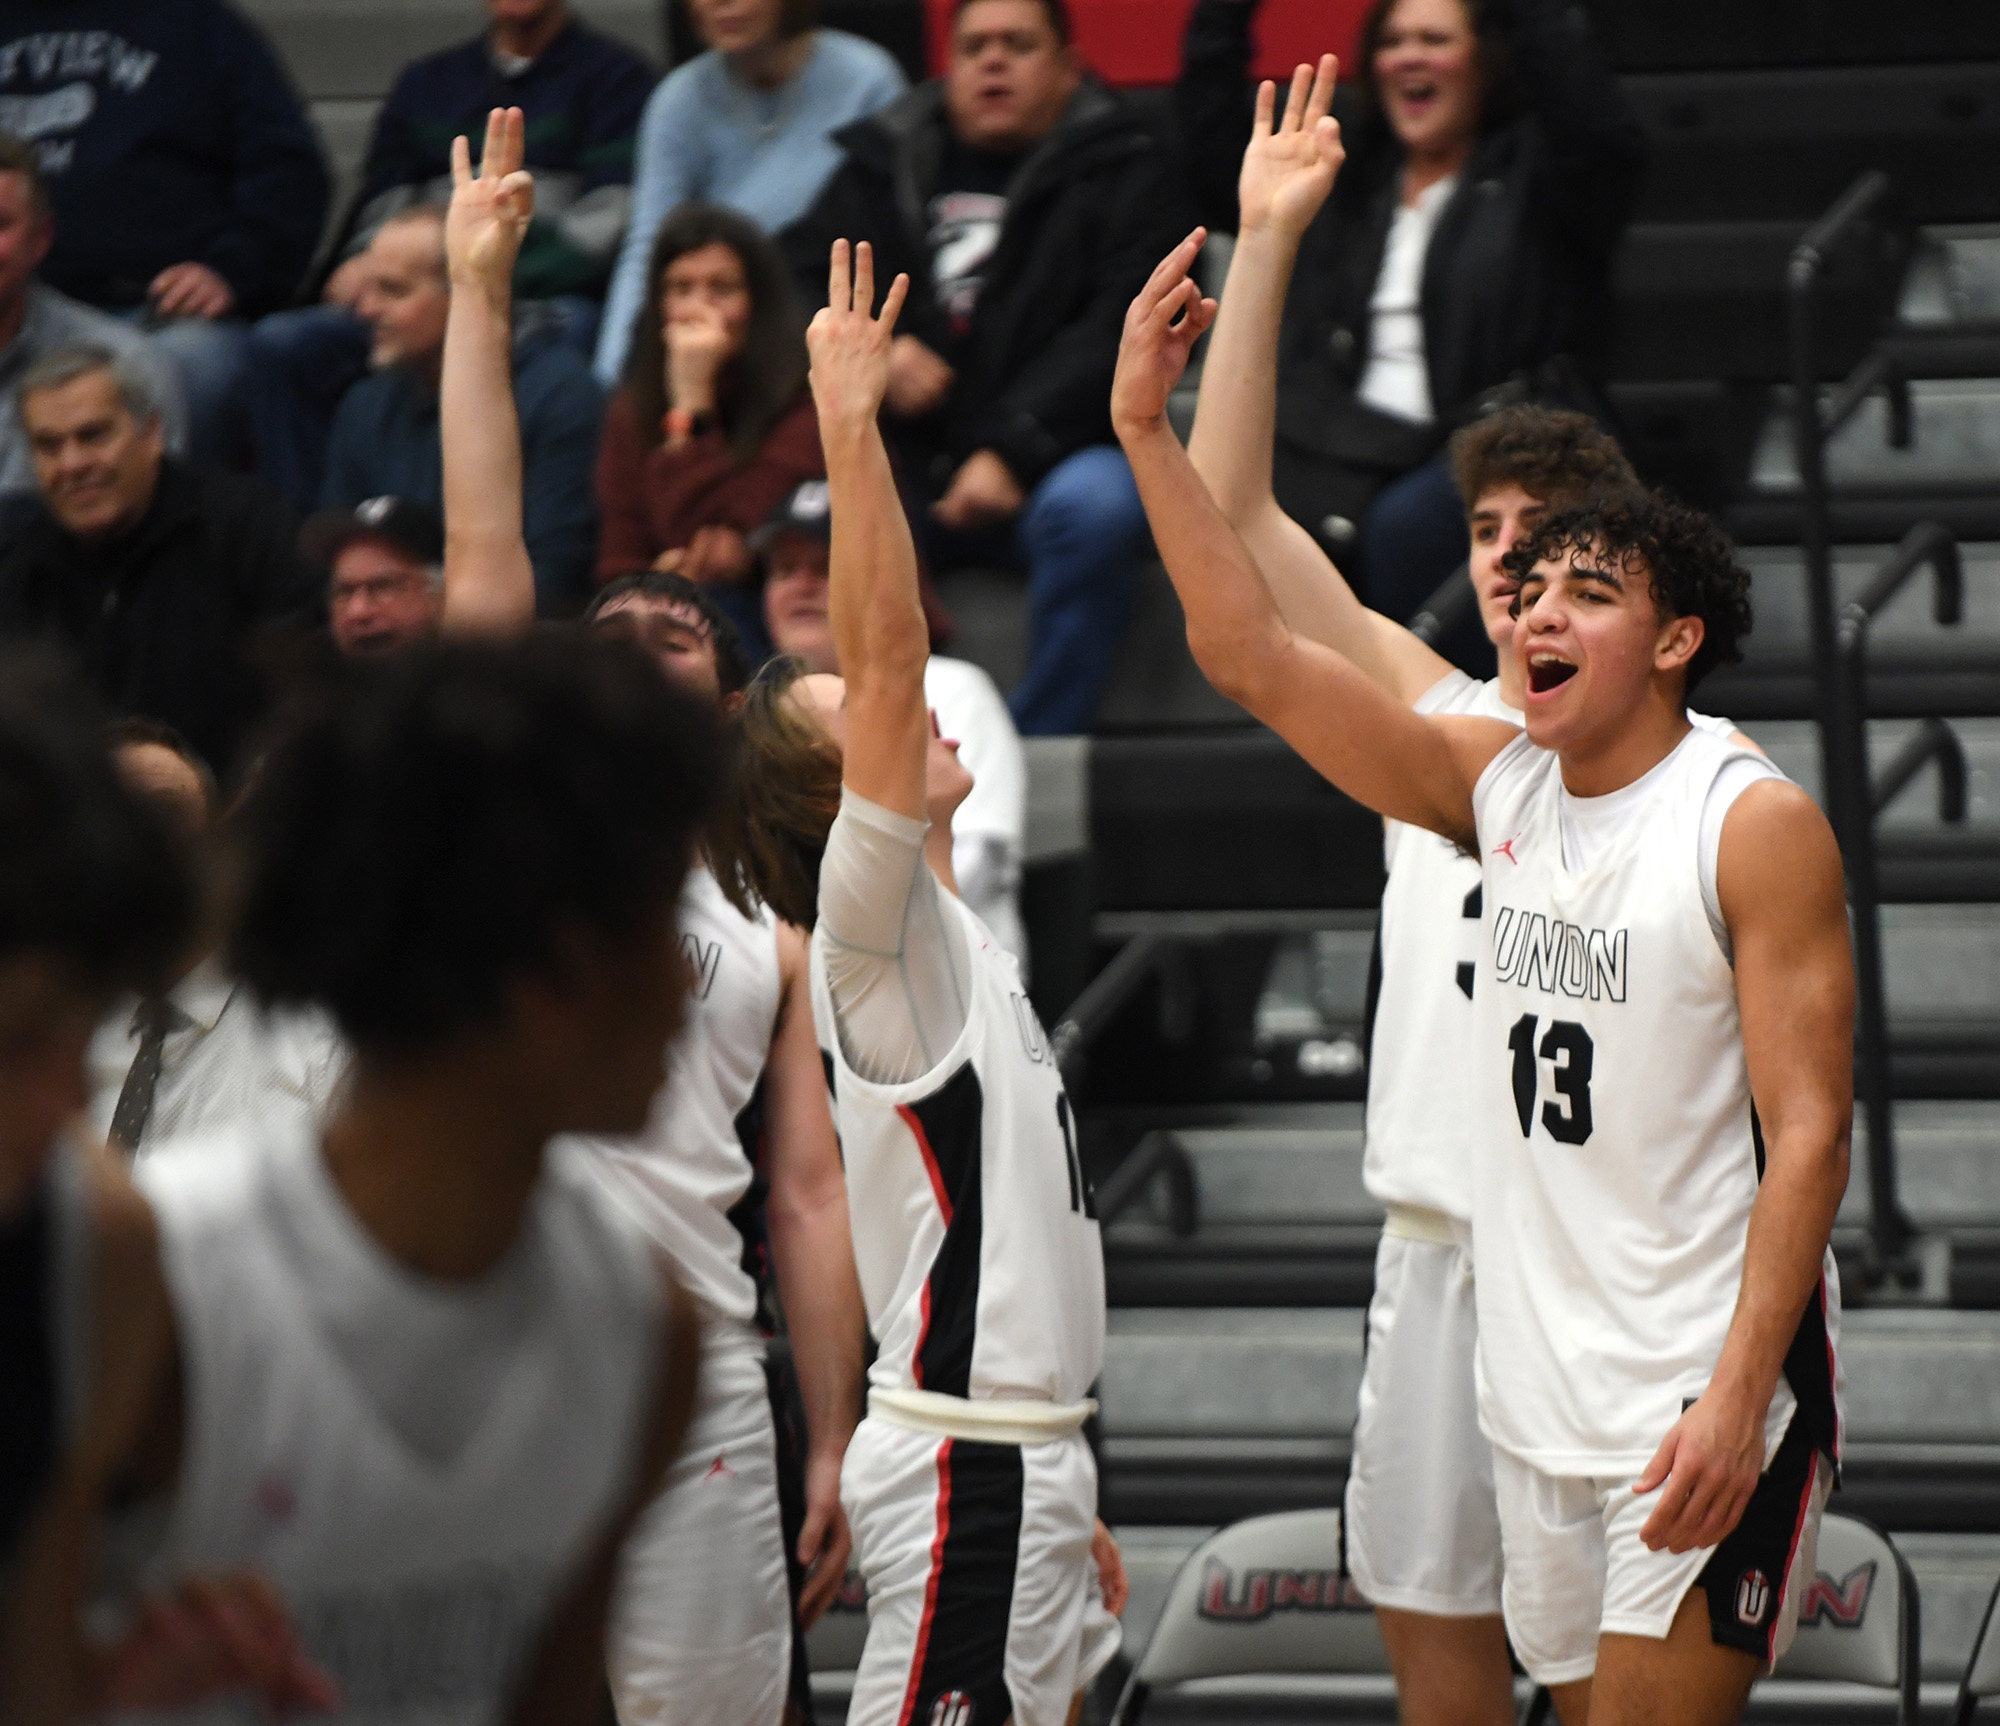 Union starters celebrate in the waning seconds Friday, Jan. 6, 2023, during the Titans’ 61-41 win against Skyview at Union High School.